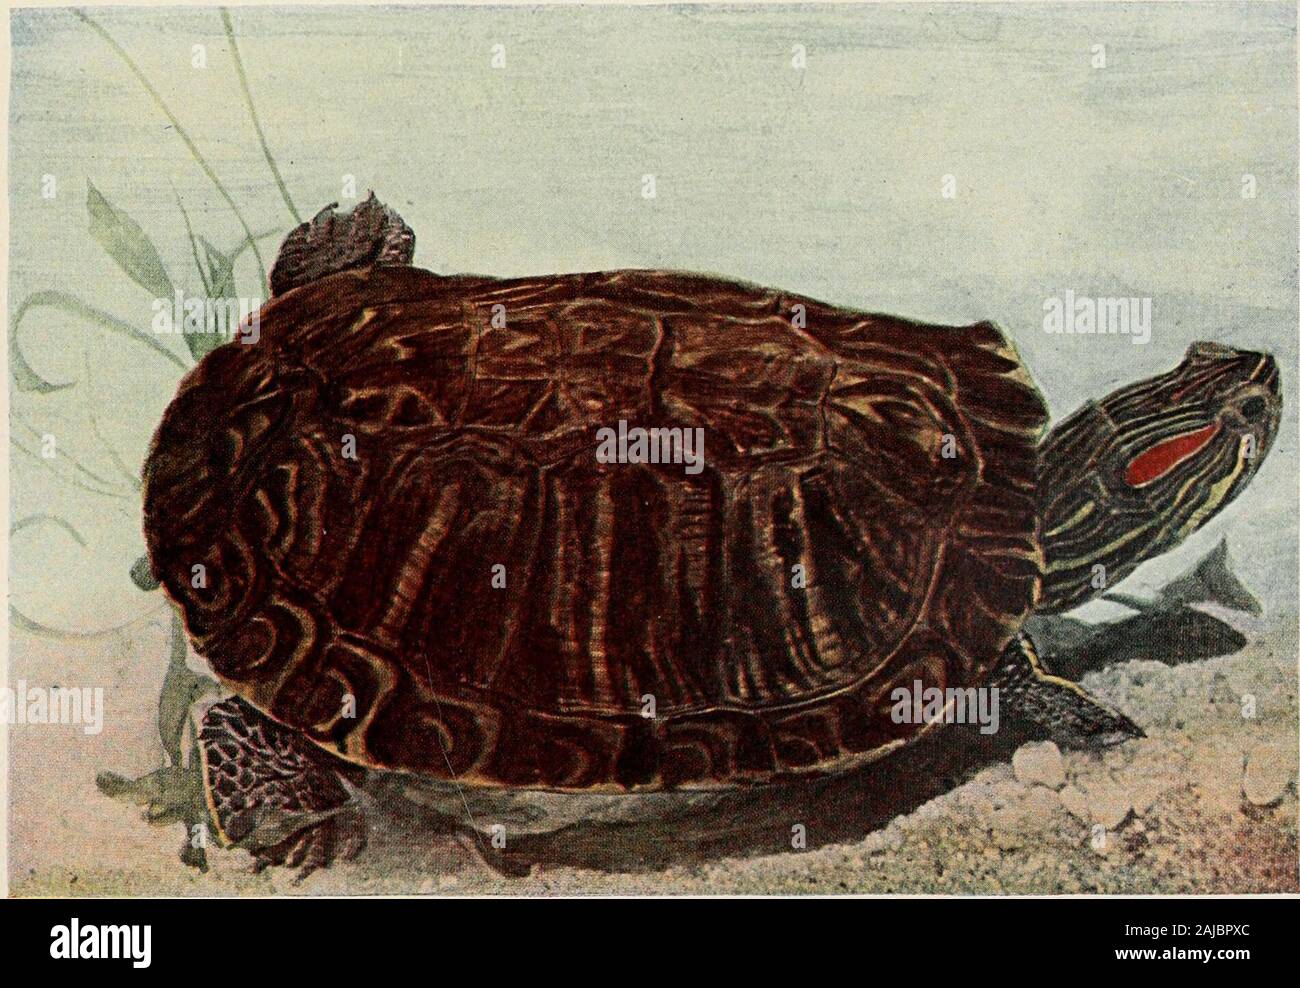 The reptile book; a comprehensive popularised work on the structure and habits of the turtles, tortoises, crocodilians, lizards and snakes which inhabit the United States and northern Mexico . Copyright, 1907. by Doubleday, Page & CompanyYELLOW-BELLIED TERRAPIN, Chrysemys scalra. One of the market terrapins. A full-grown shell is about eleven inches long and characterised by numerous parallel furrows. Found in the coast region—North Carolina to Georgia.. Copyright, 1907. by Doubleday, Page & CompanyCUMBERLAND TERRAPIN, Chrysemys elegans. Closely allied to C. scabra, though at once distinct by Stock Photo